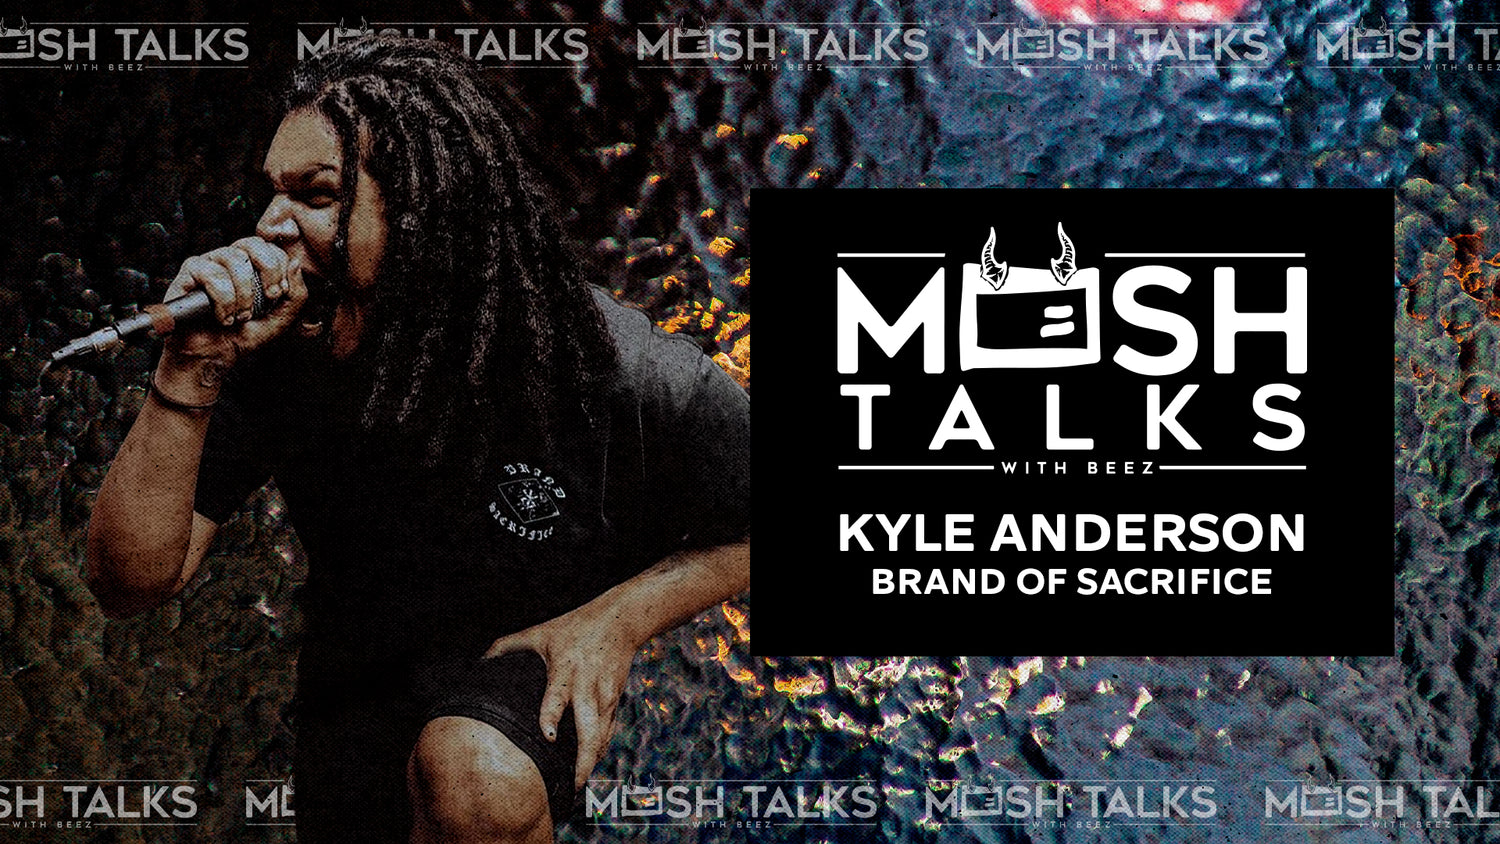 Brand of Sacrifice frontman Kyle Anderson discusses the thriving third wave of deathcore on Mosh Talks